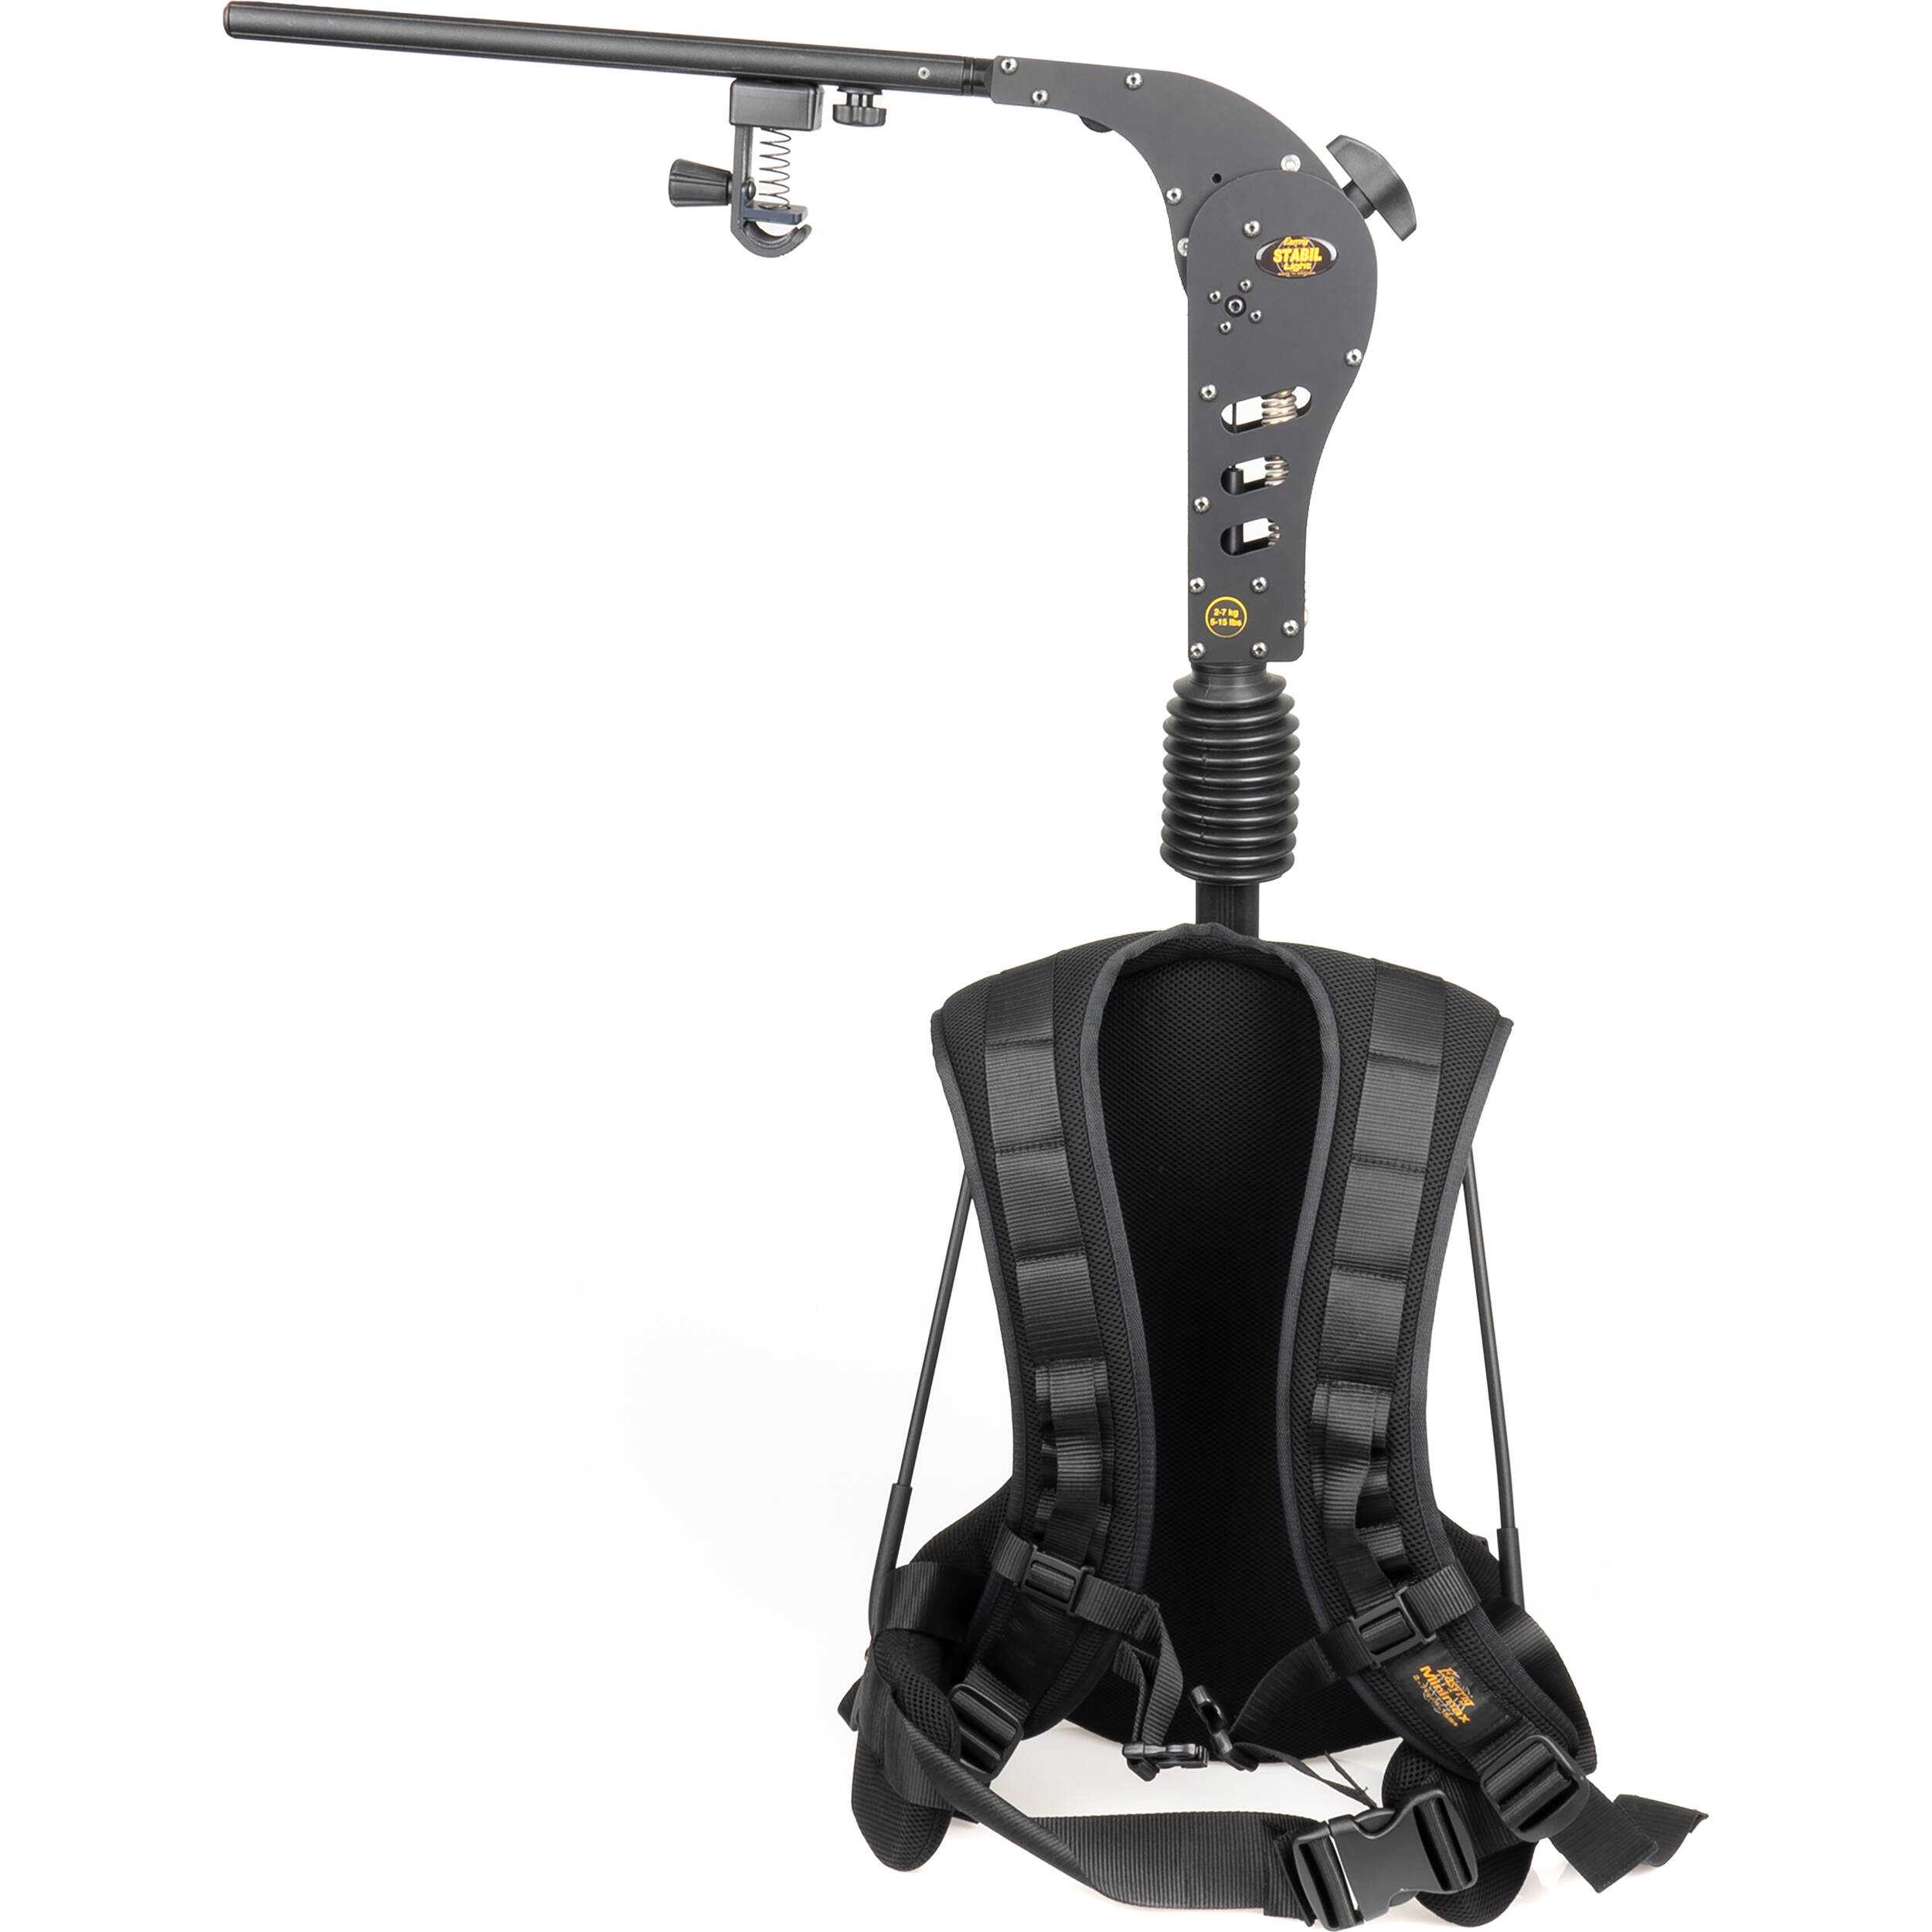 Easyrig Minimax STABIL Light, complete with bag